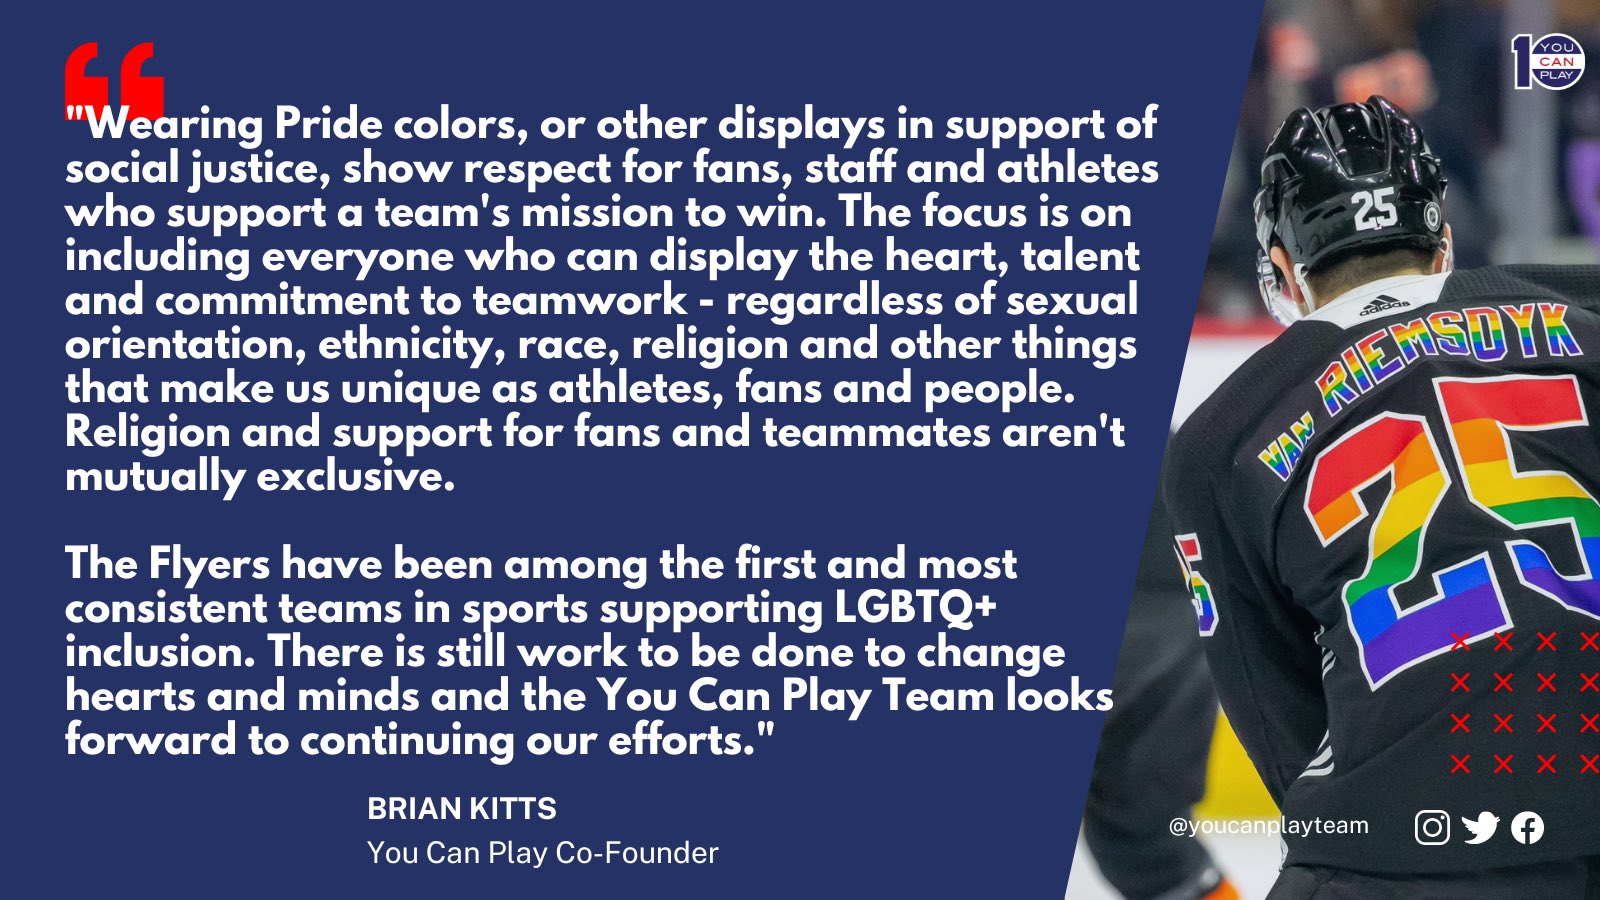 You Can Play (@YouCanPlayTeam) / X